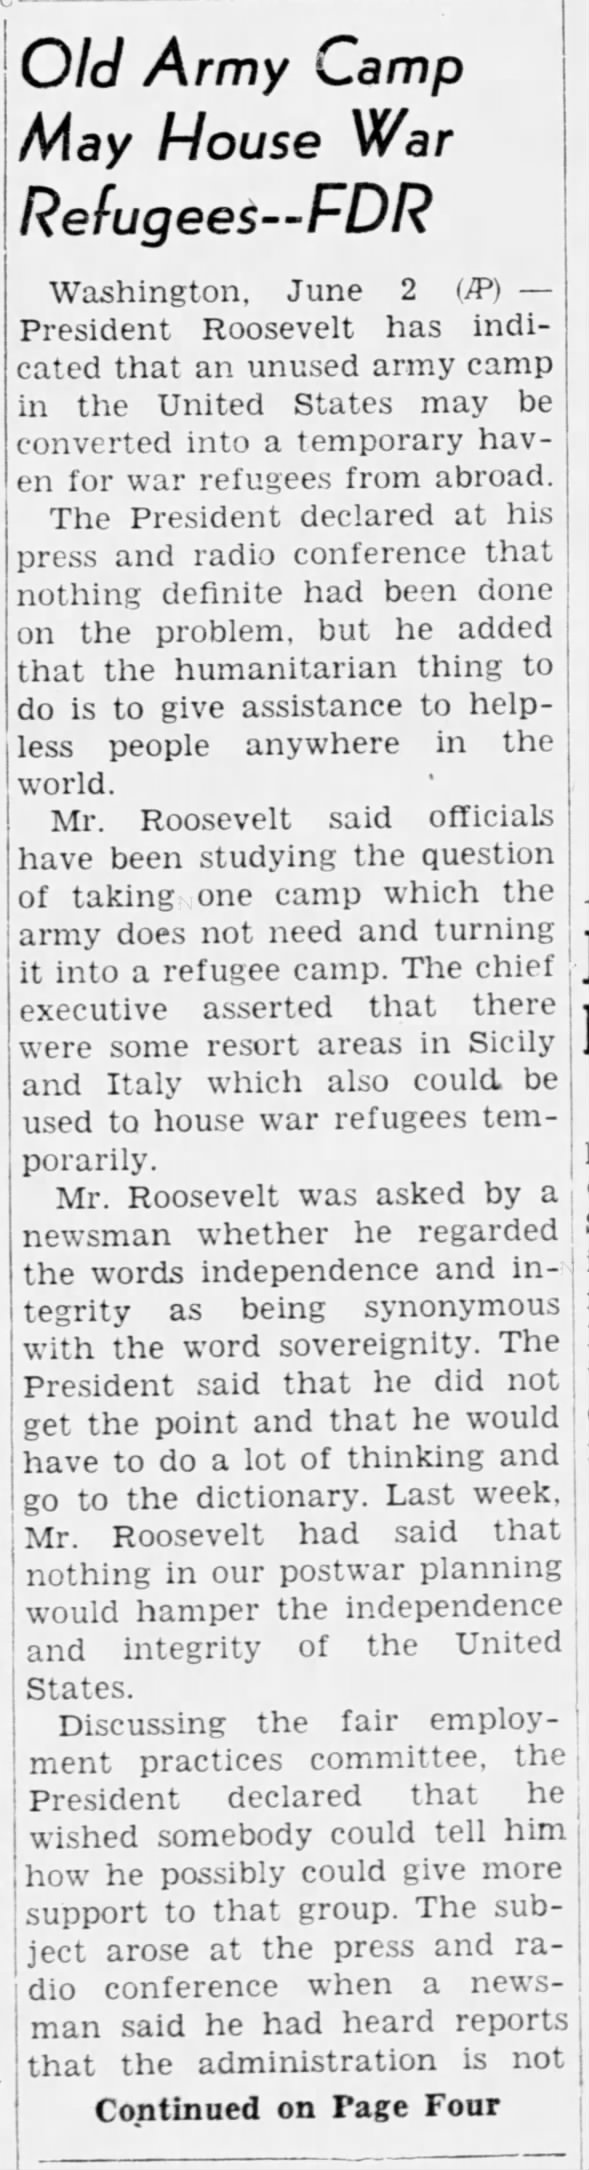 Old Army Camp May House War Refugees -- FDR